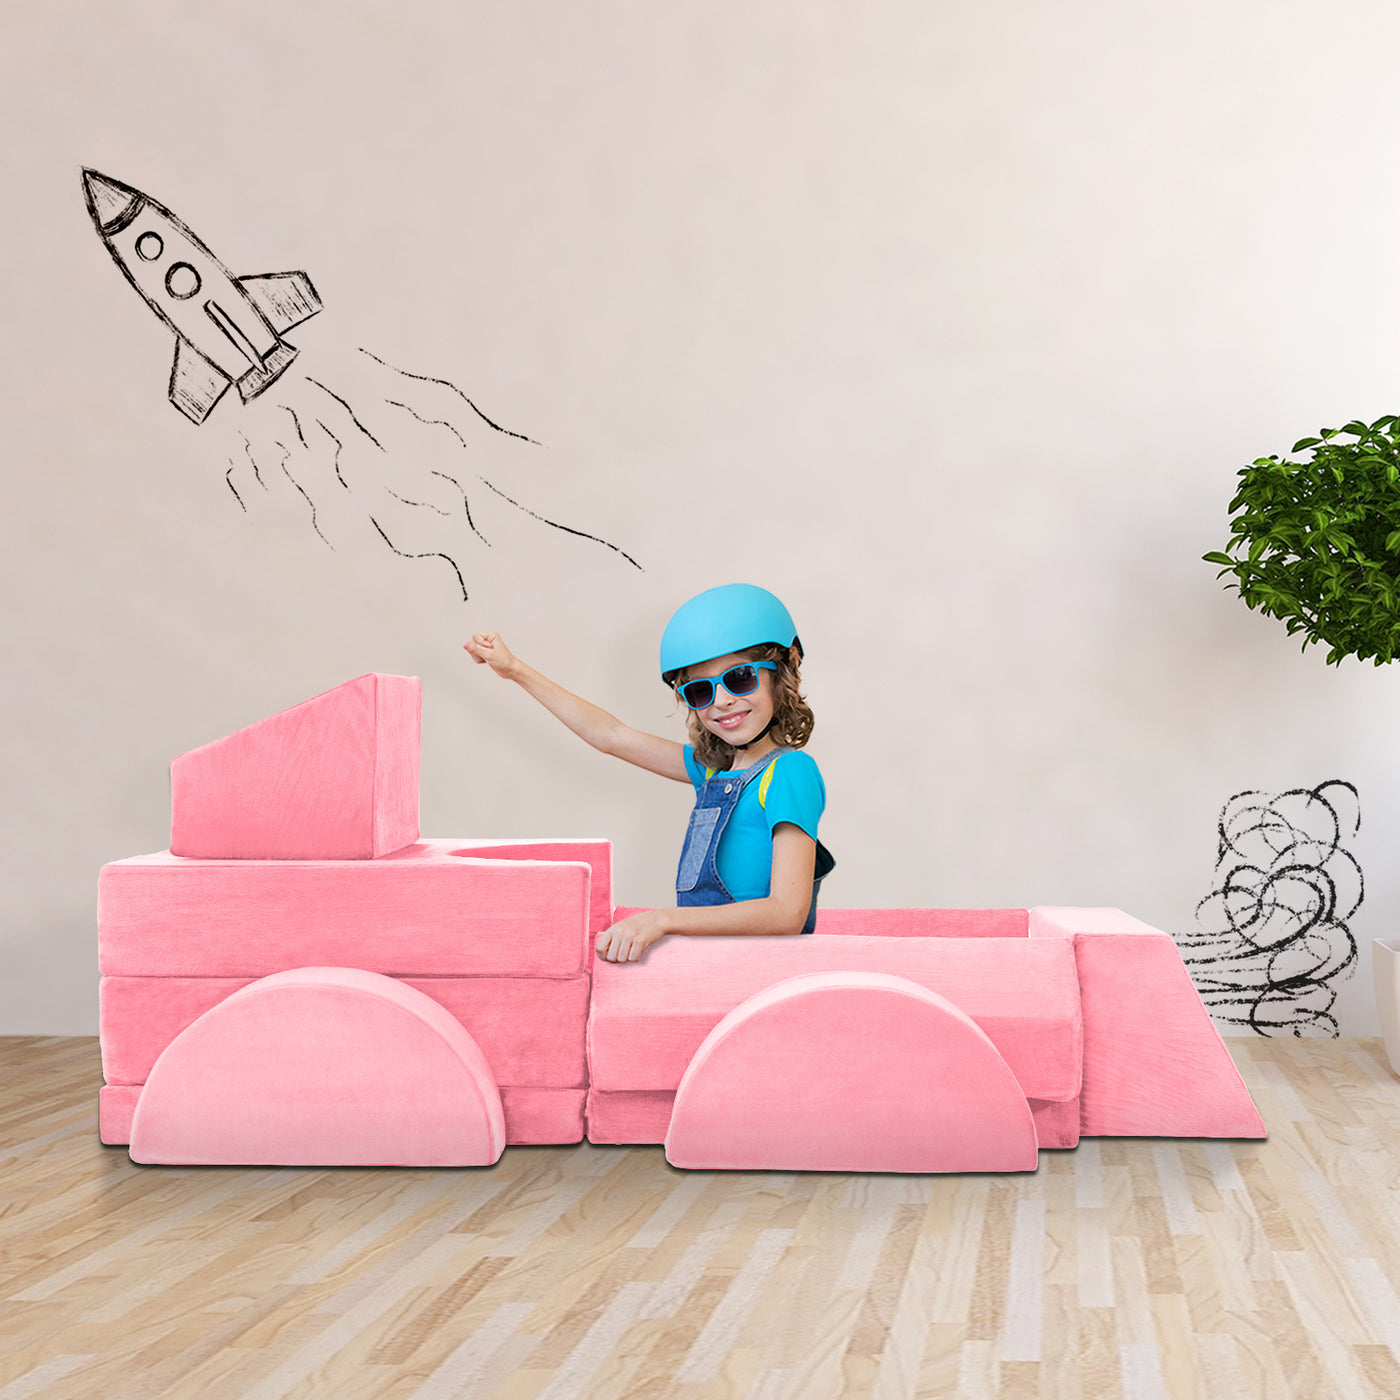 10-Piece Modular Convertible Kids Play Couch Sofa Set with Removable Velvet Covers (Pink)